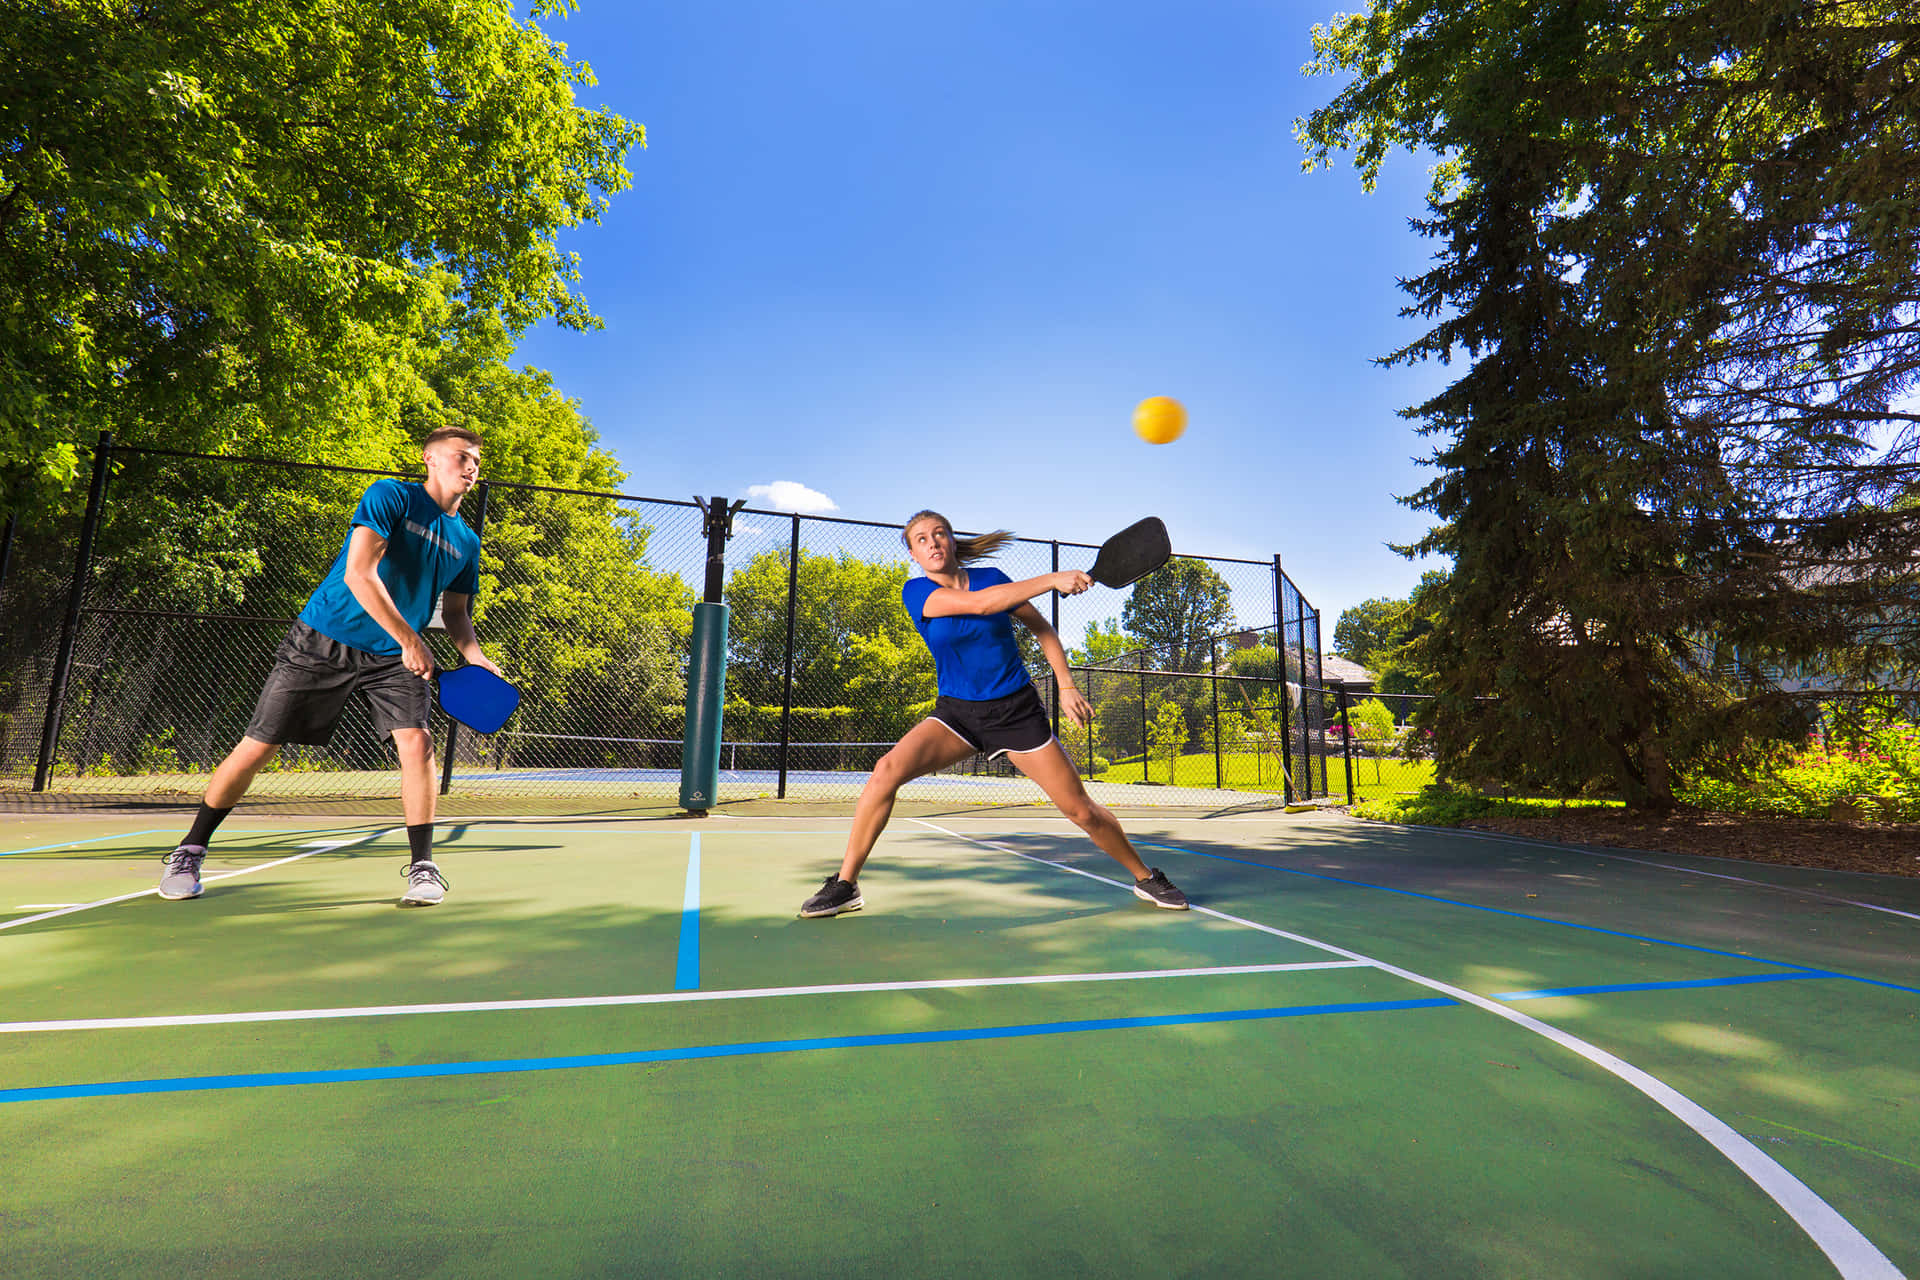 "A match of Pickleball is filled with fun, friendly competition!"